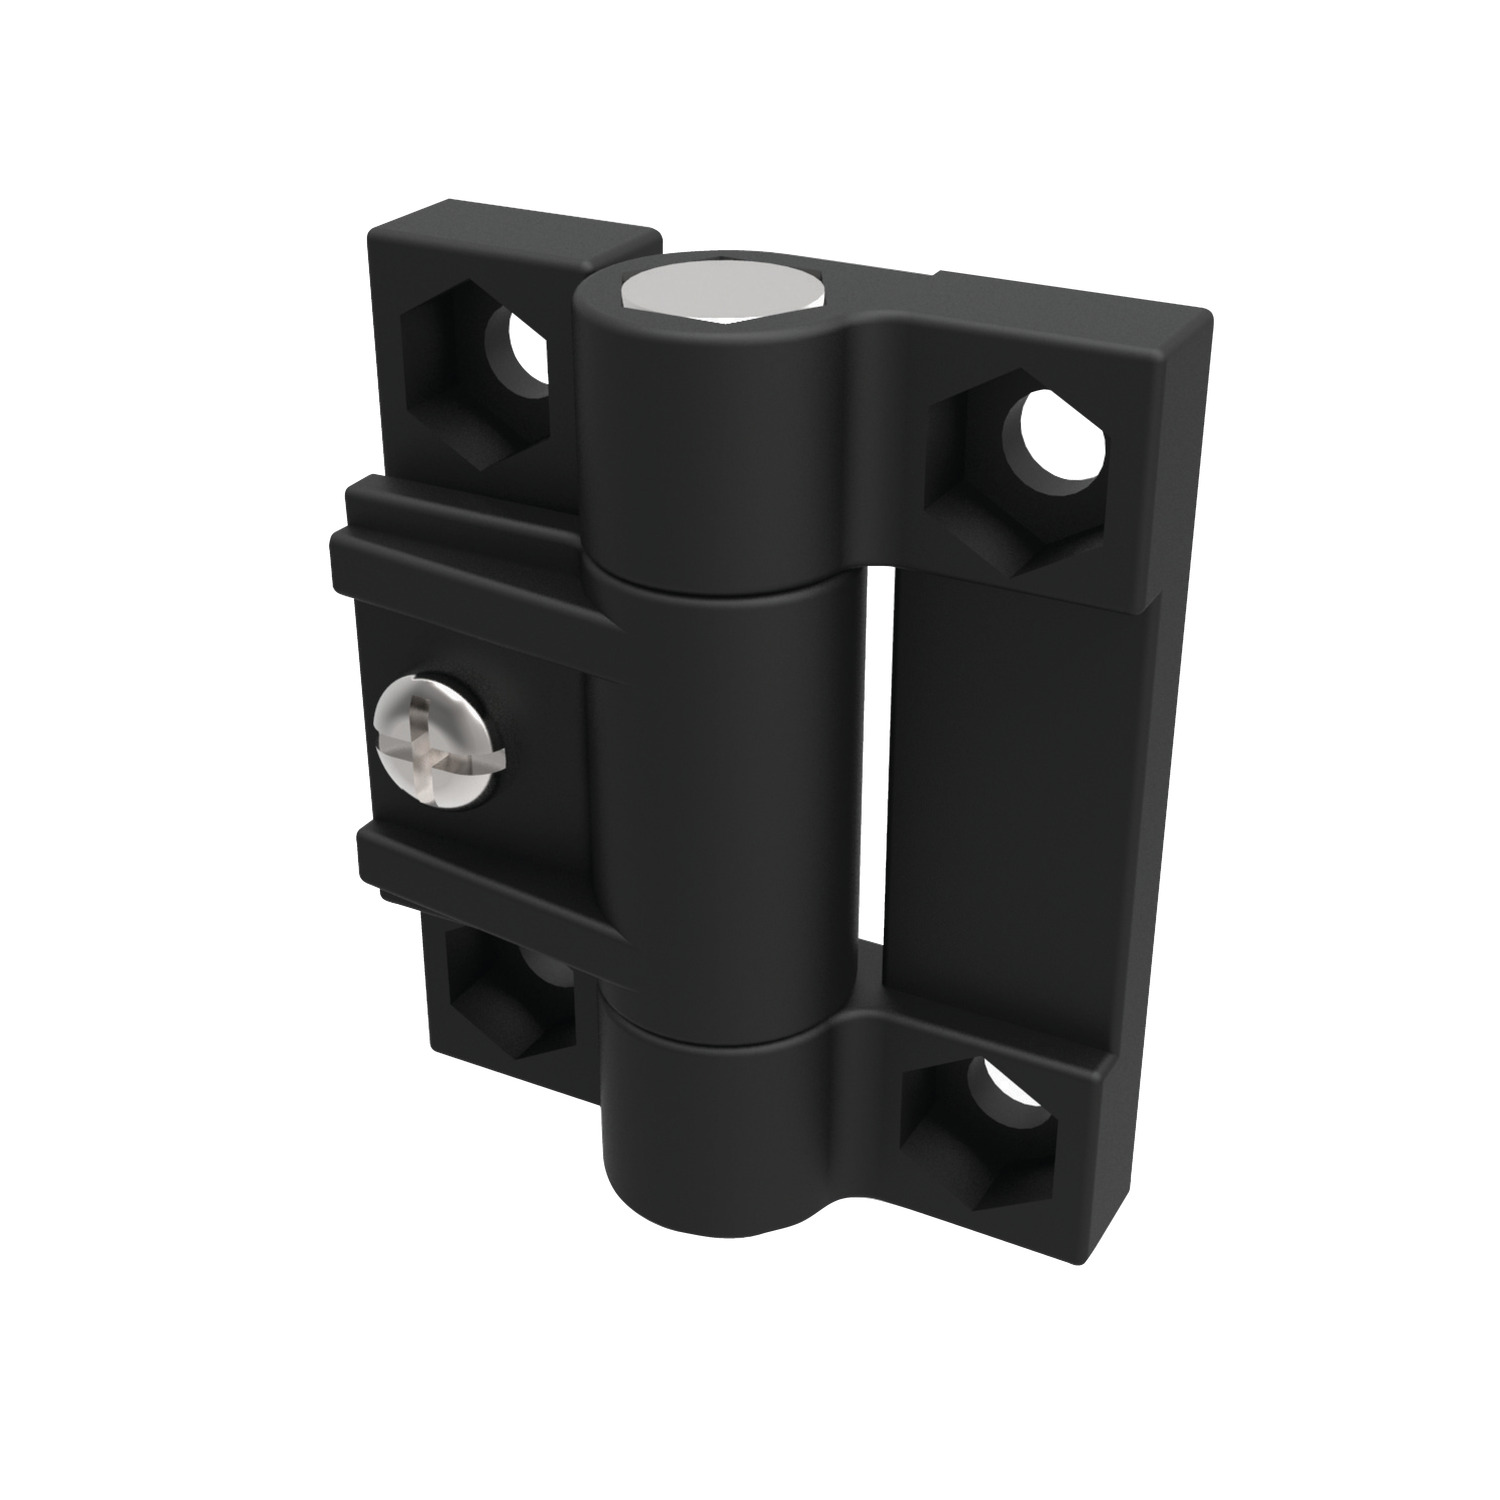 Adjustable Torque - Friction Hinge Made from polyamide, black finish. Opening angle 160°. Hinge torque adjusted by screw. Provides position control. Supplied with fixing nuts and bolts.